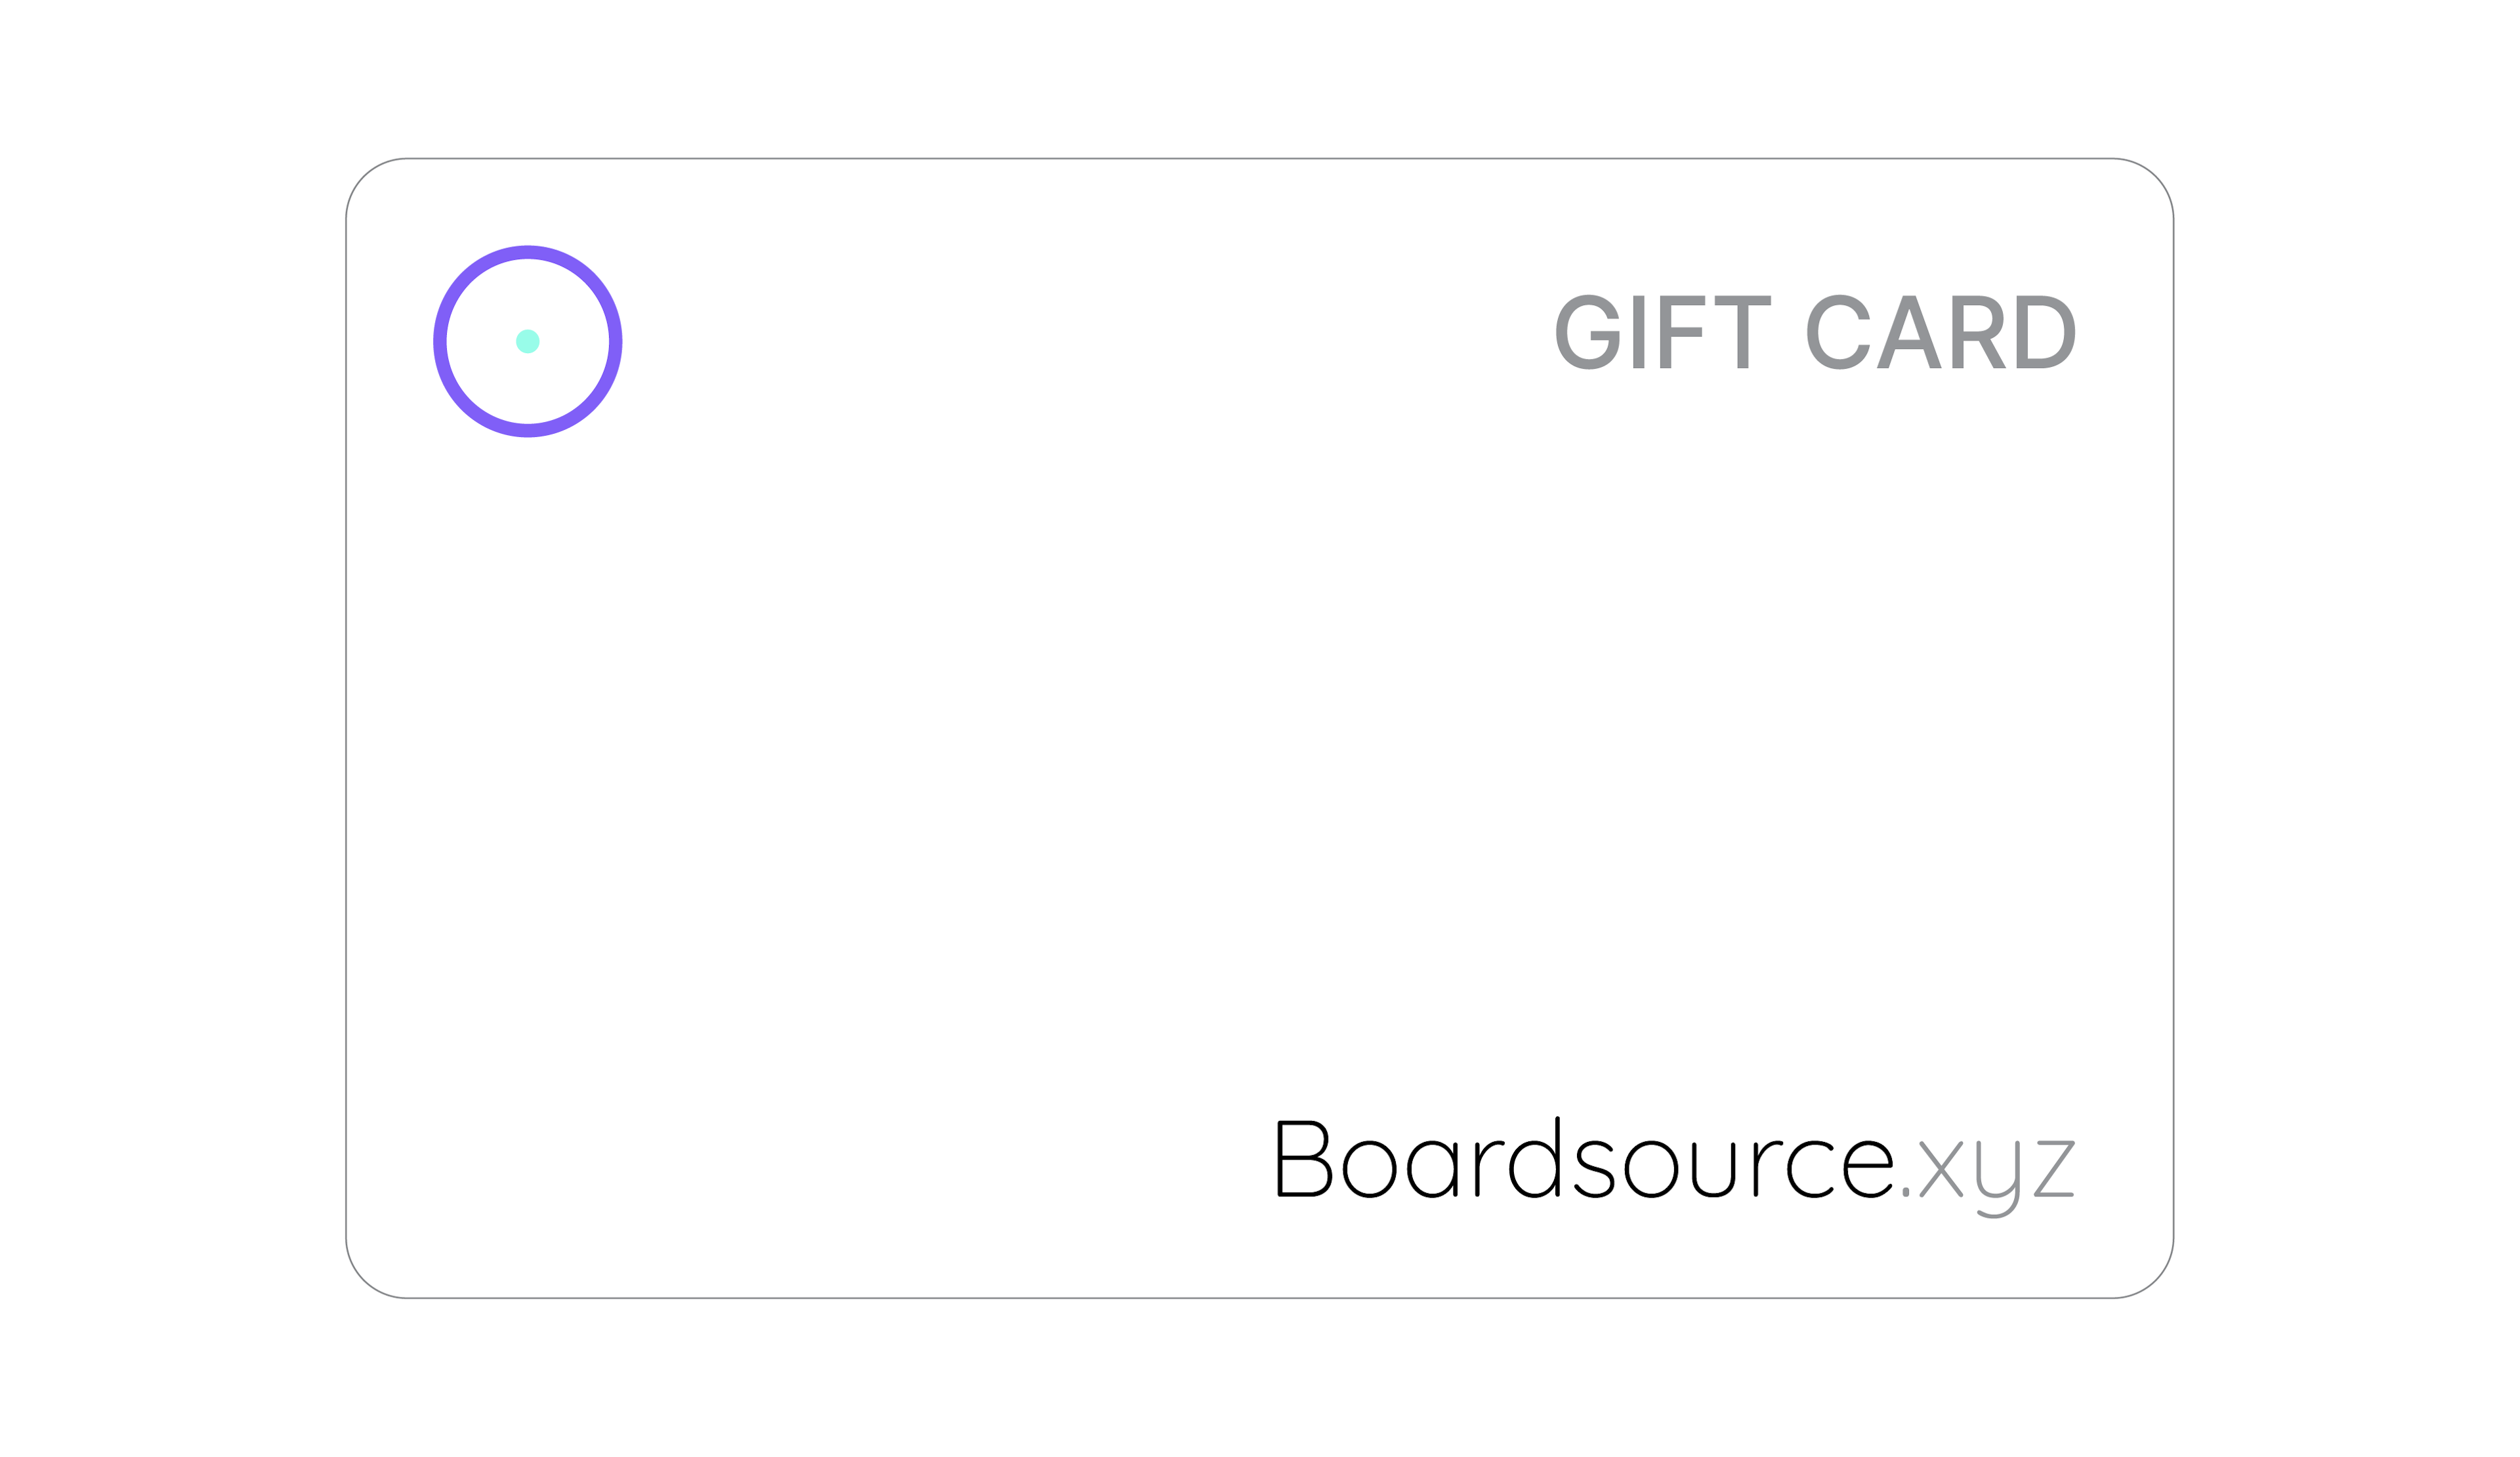 Boardsource Gift Card